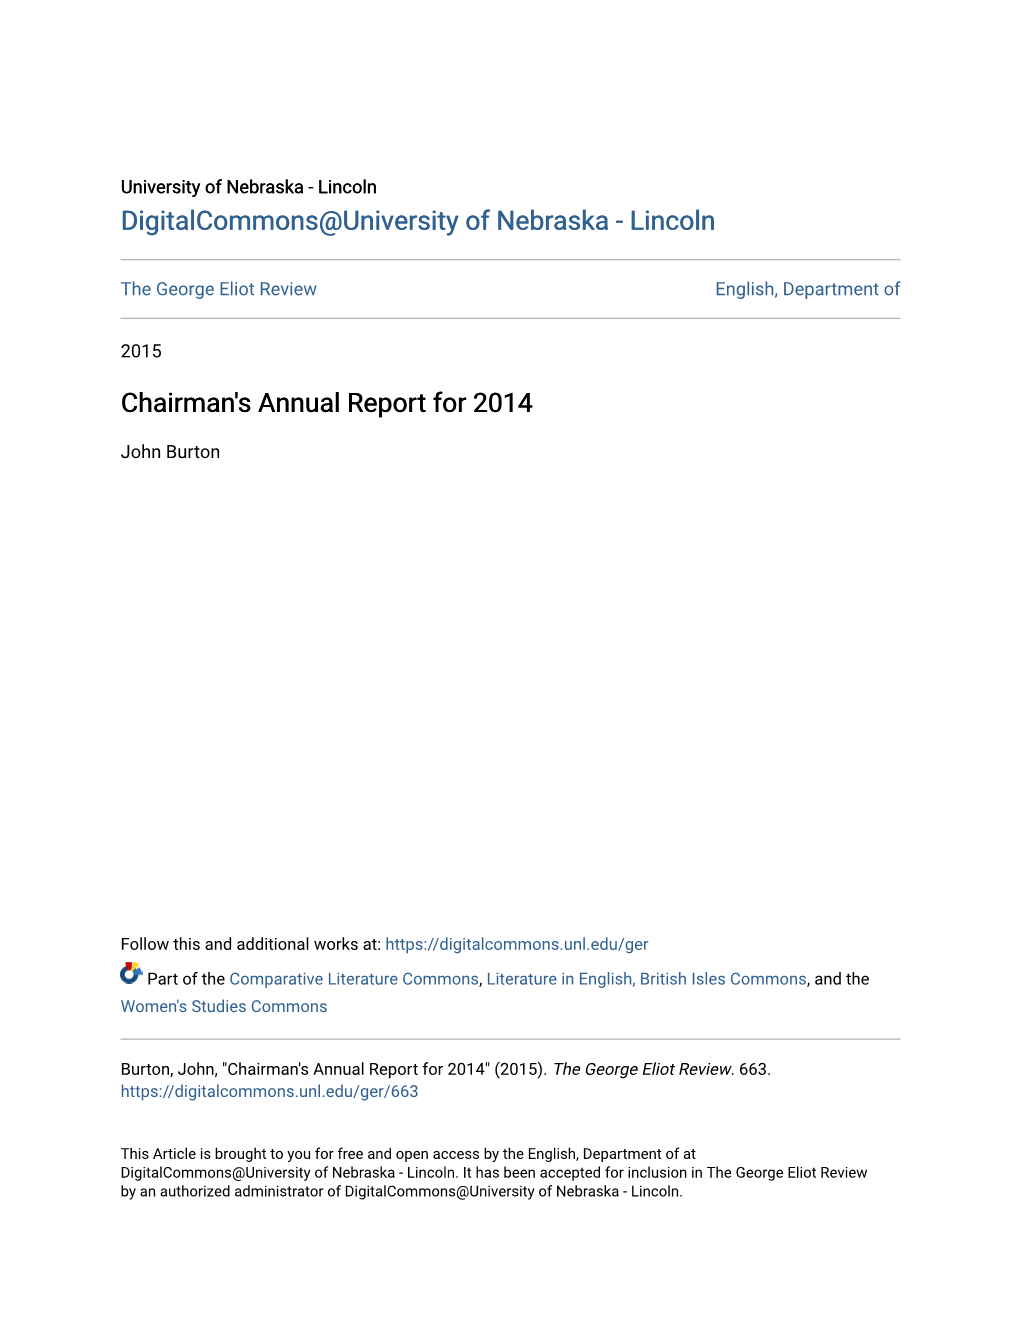 Chairman's Annual Report for 2014